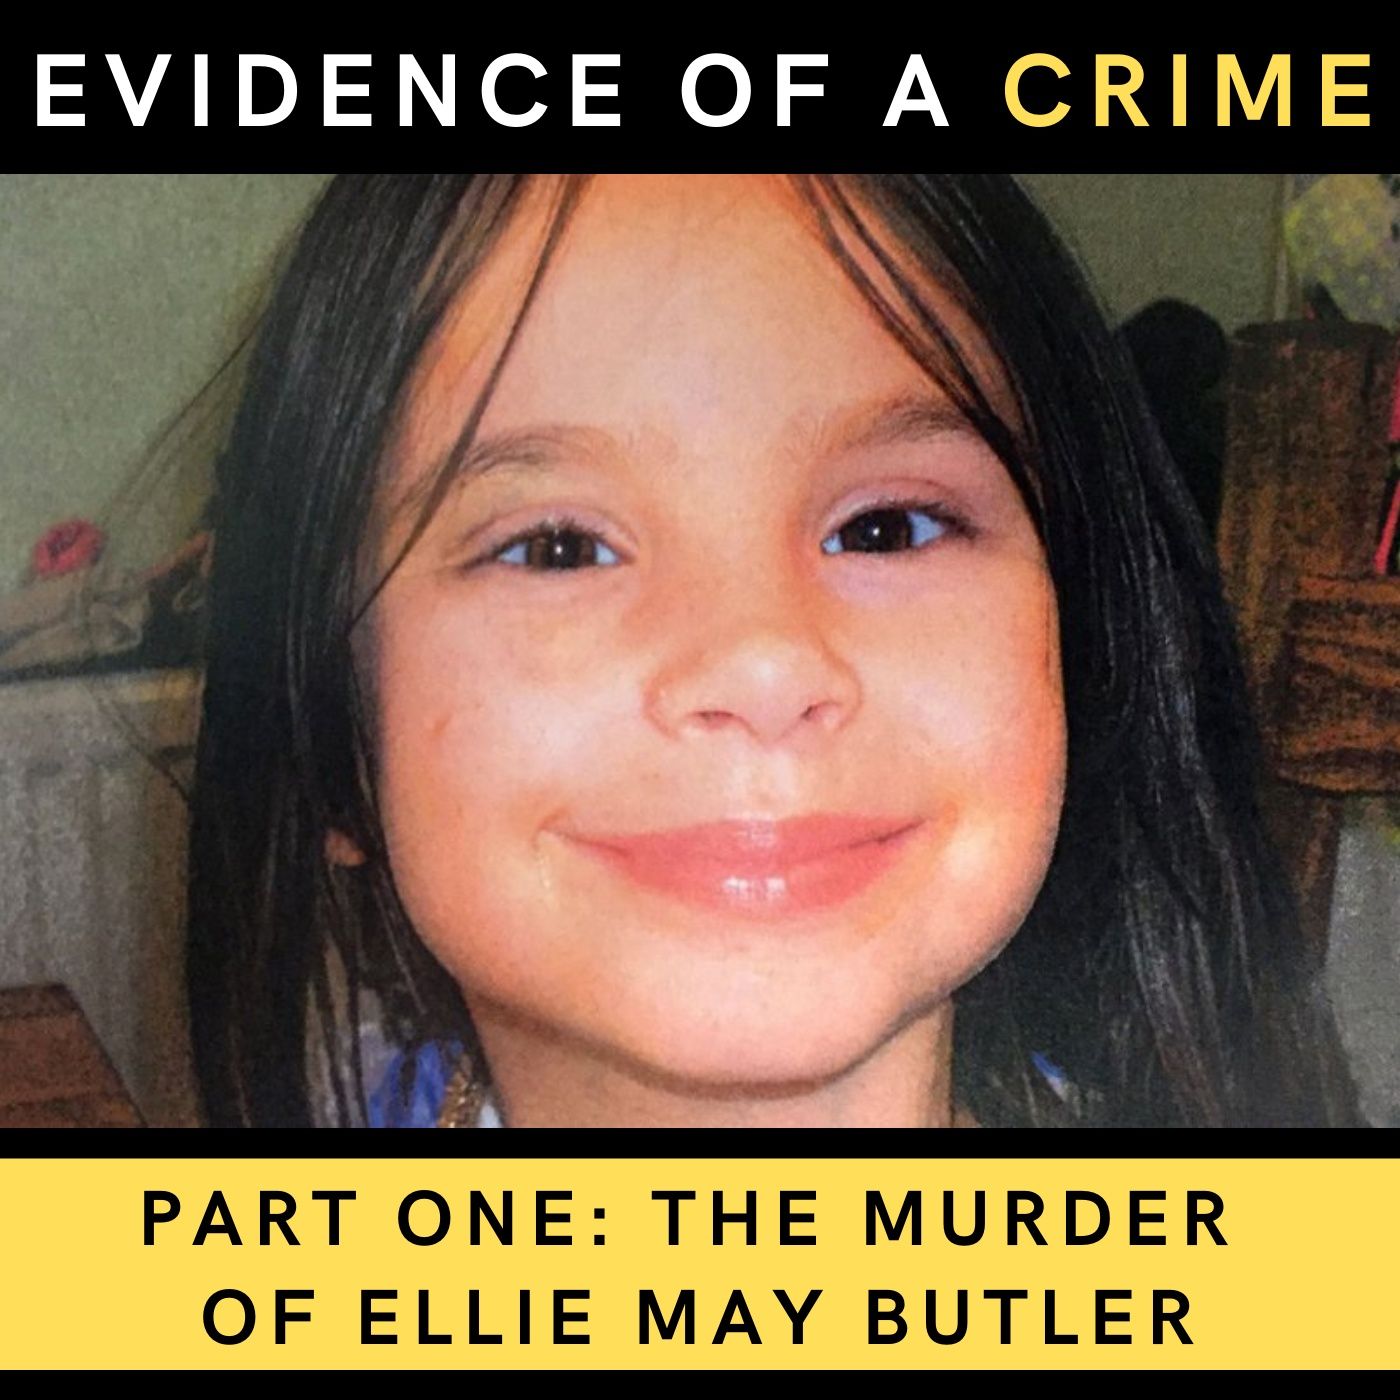 Part One: The Murder of Ellie May Butler